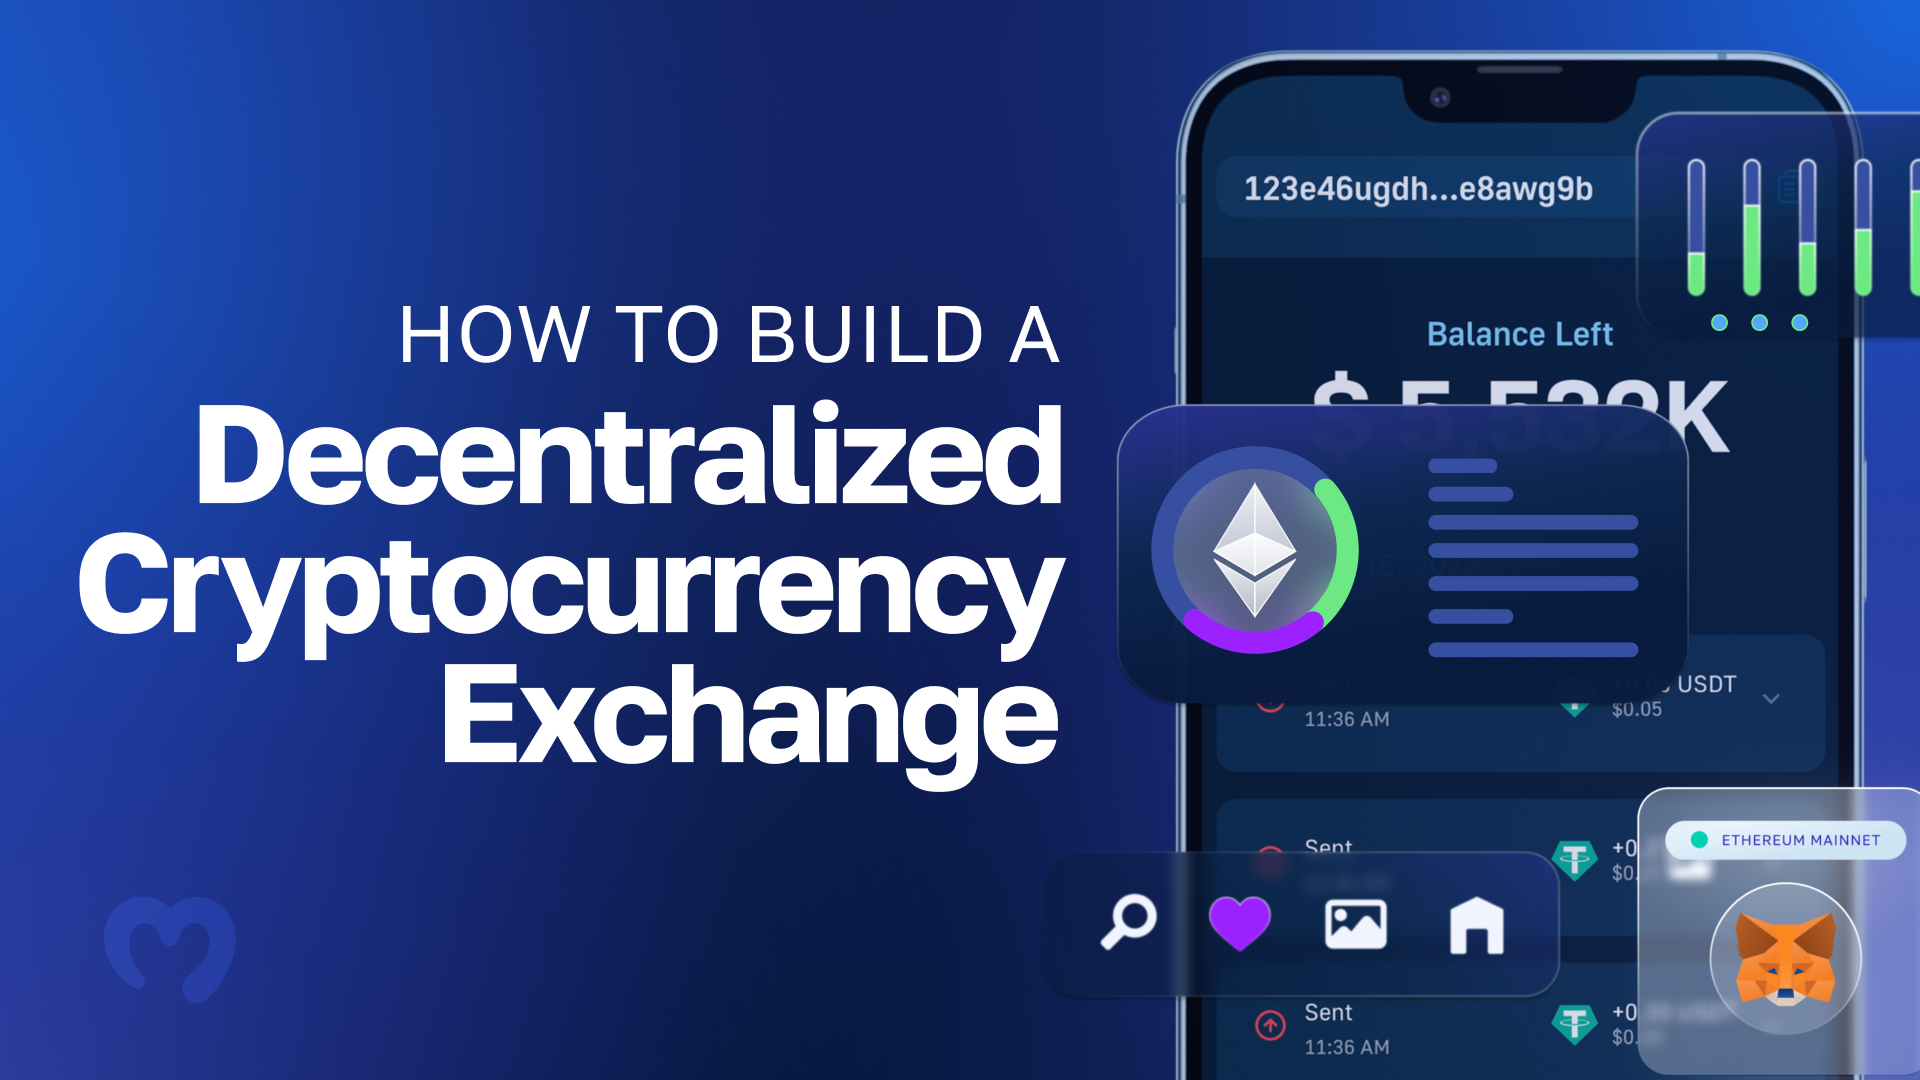 How to Build a Decentralized Cryptocurrency Exchange